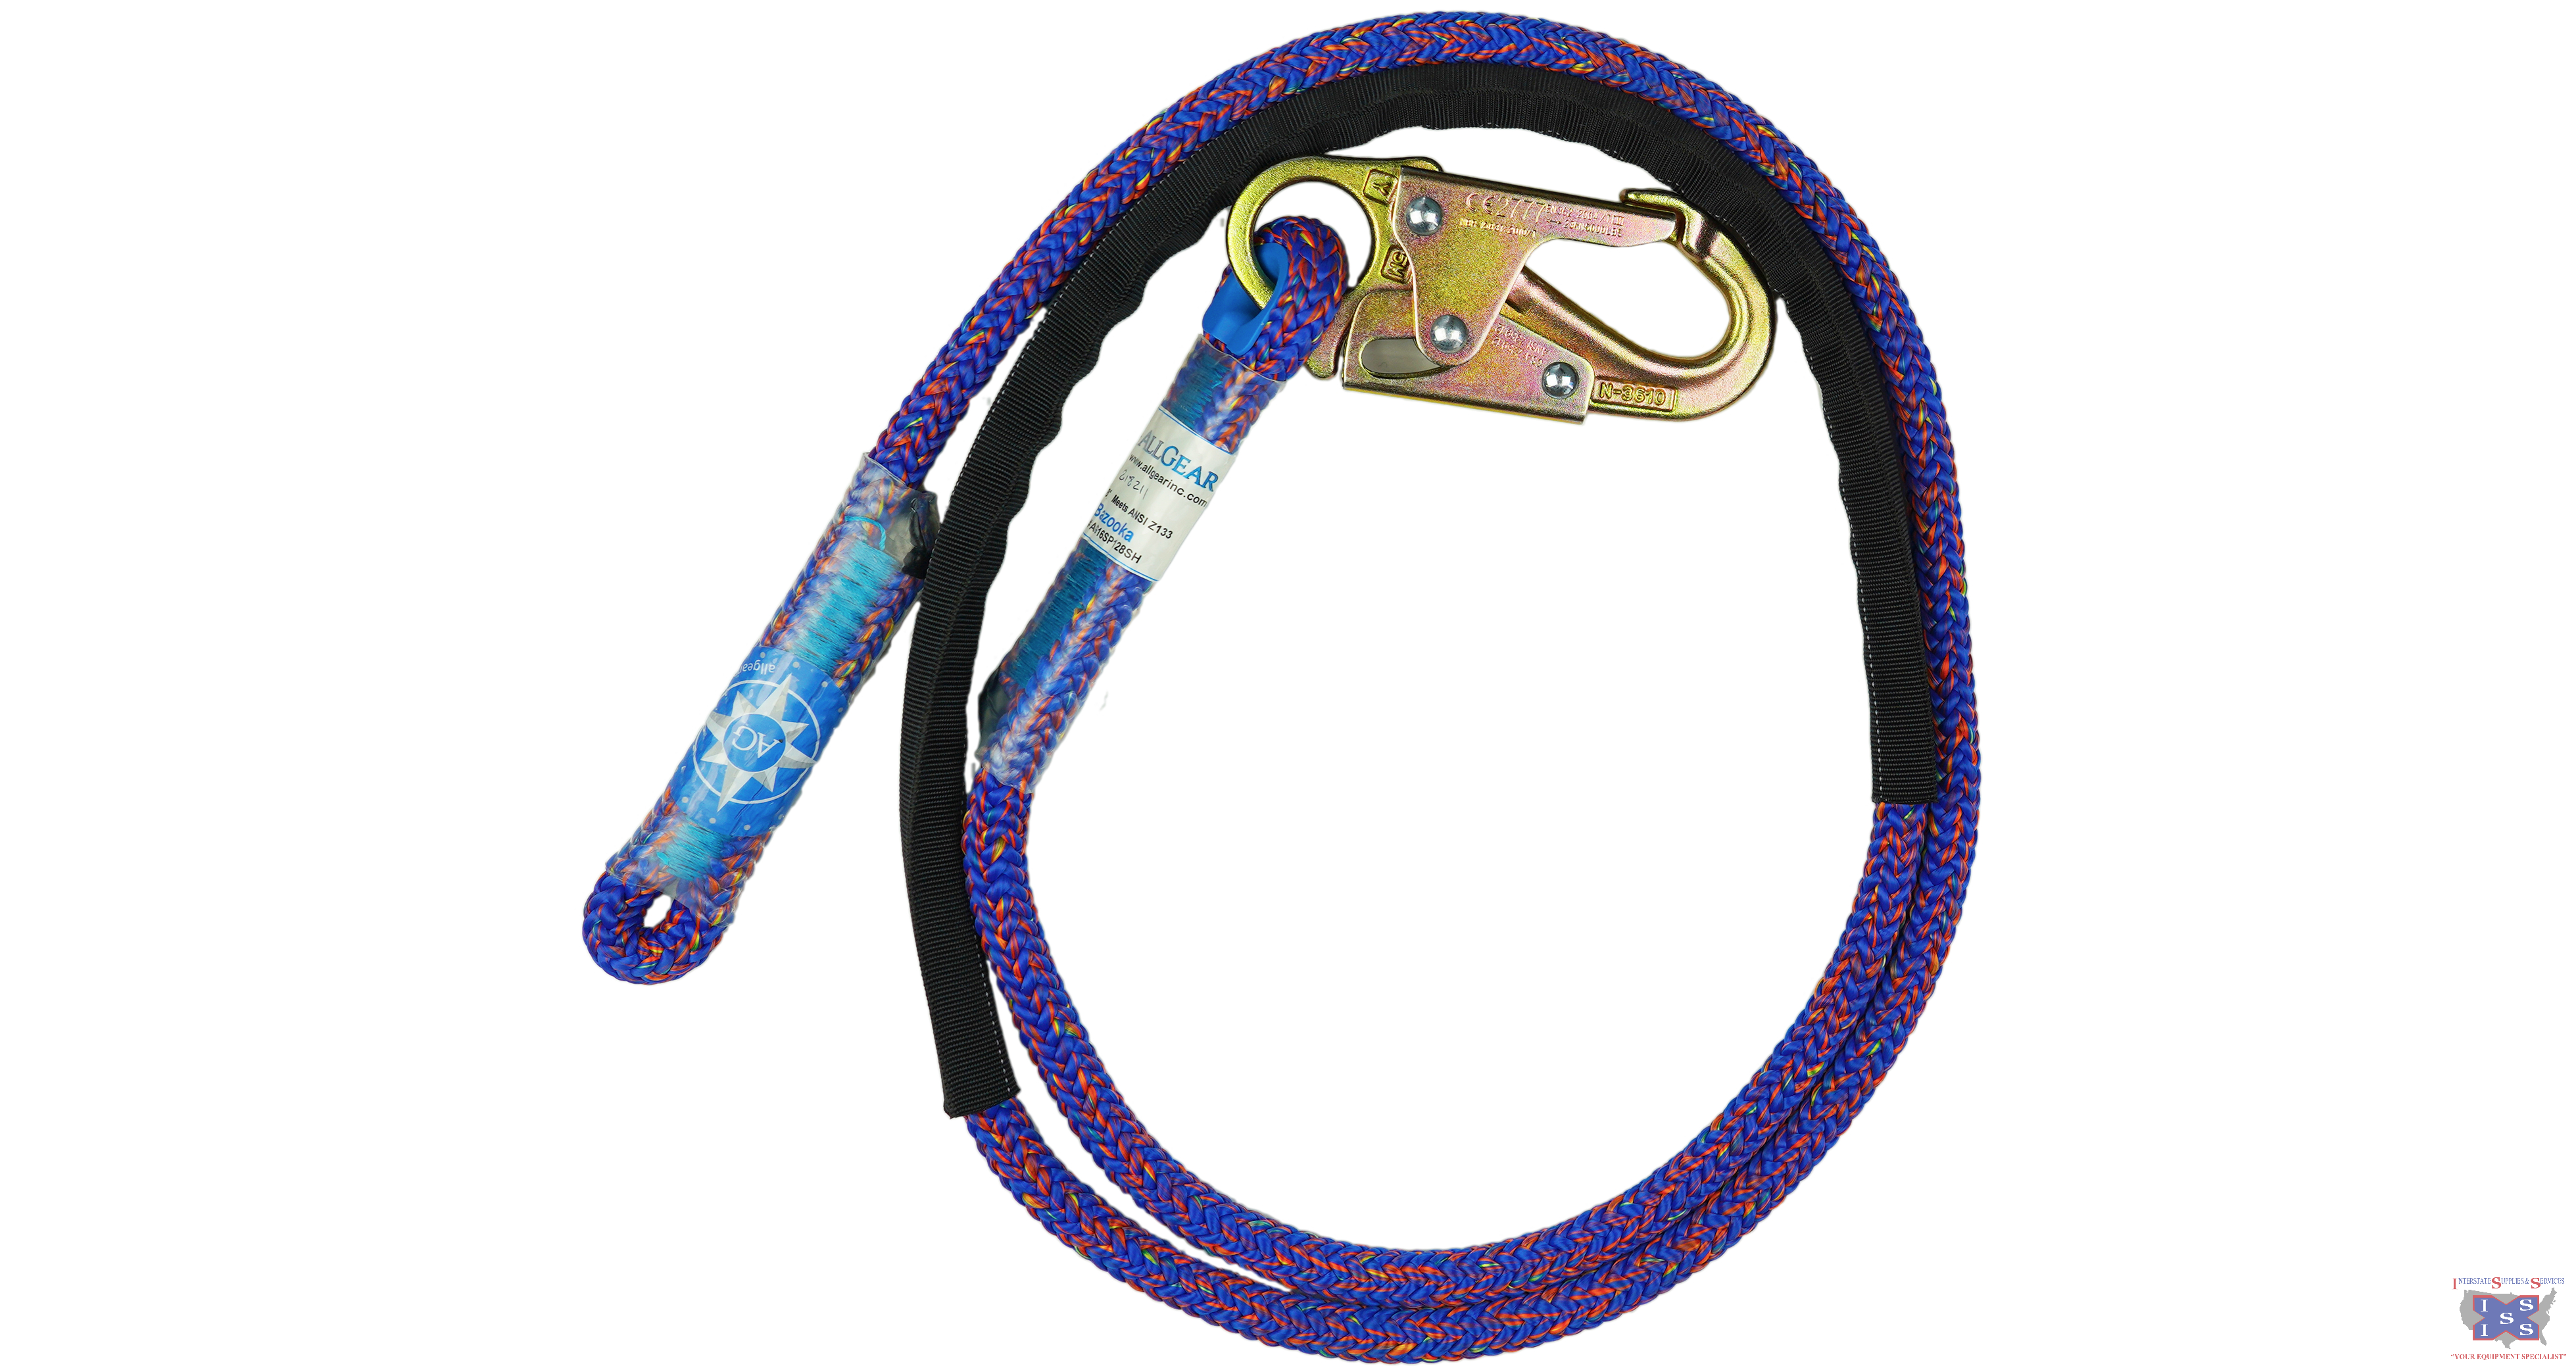 AllGear Extendable Safety Lanyard 1/2" x 8' - Click Image to Close